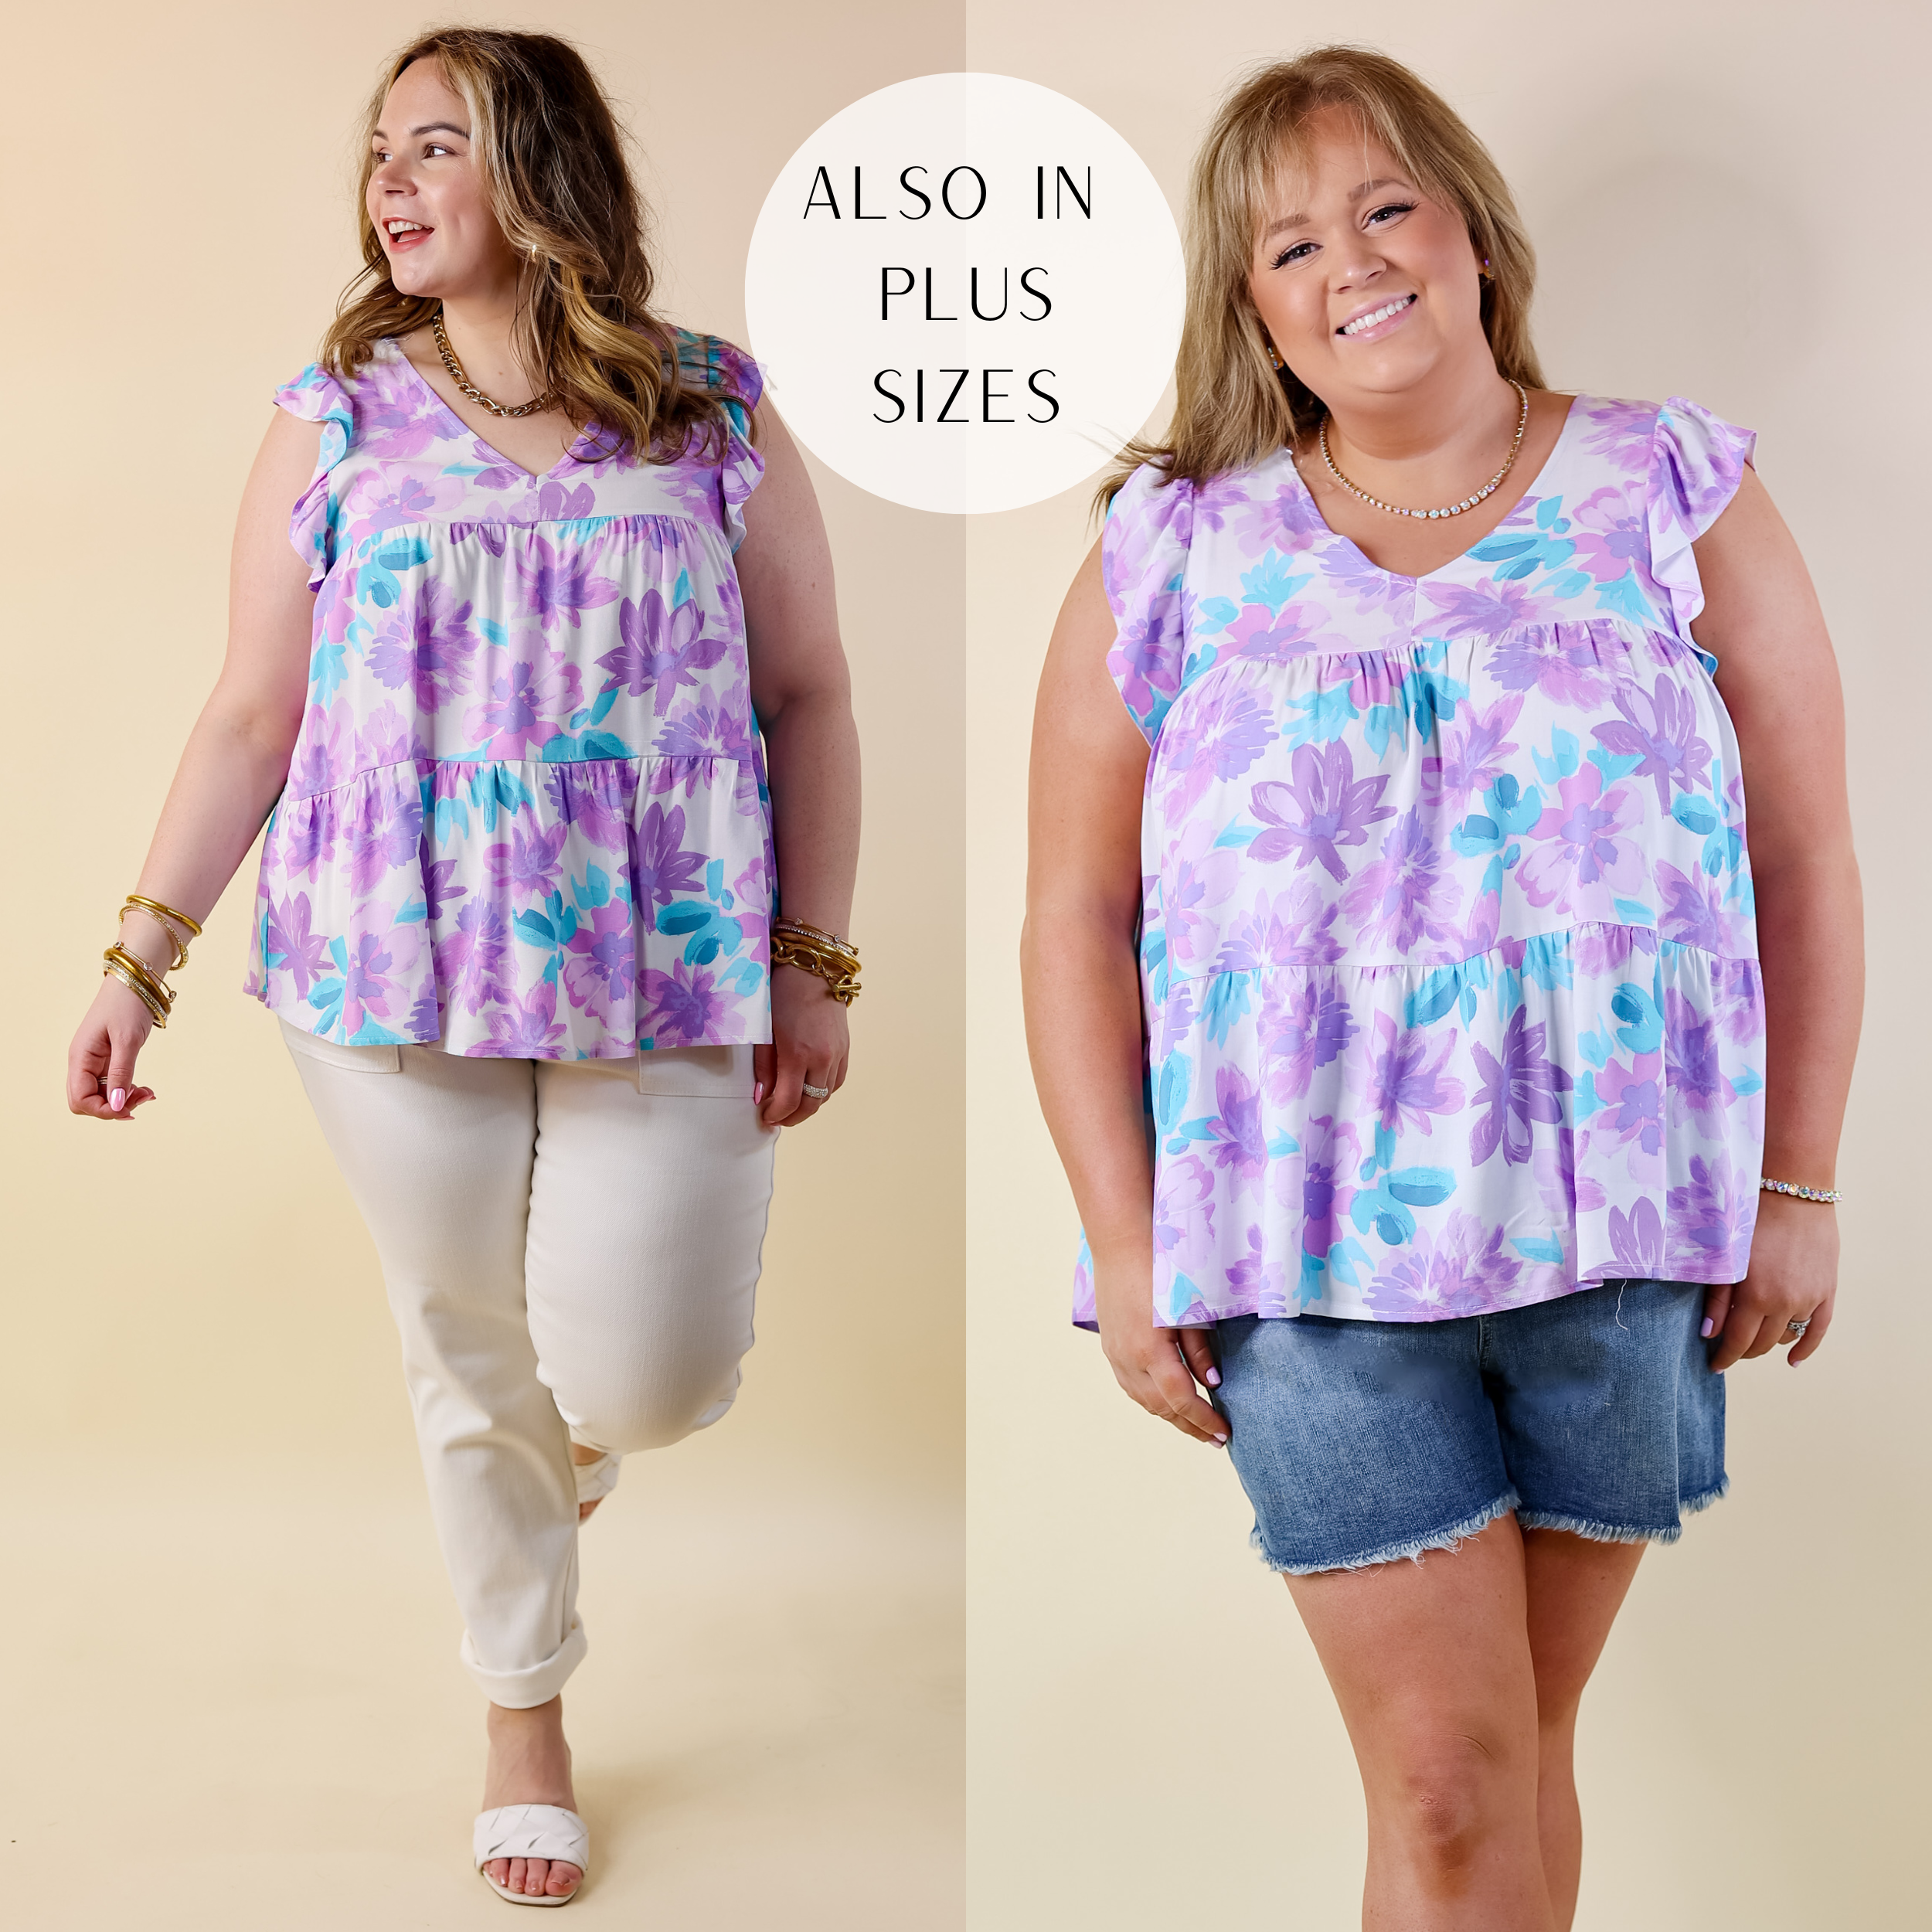 Inspiring Sights Floral V Neck Top with Ruffle Cap Sleeves in Lavender Purple - Giddy Up Glamour Boutique